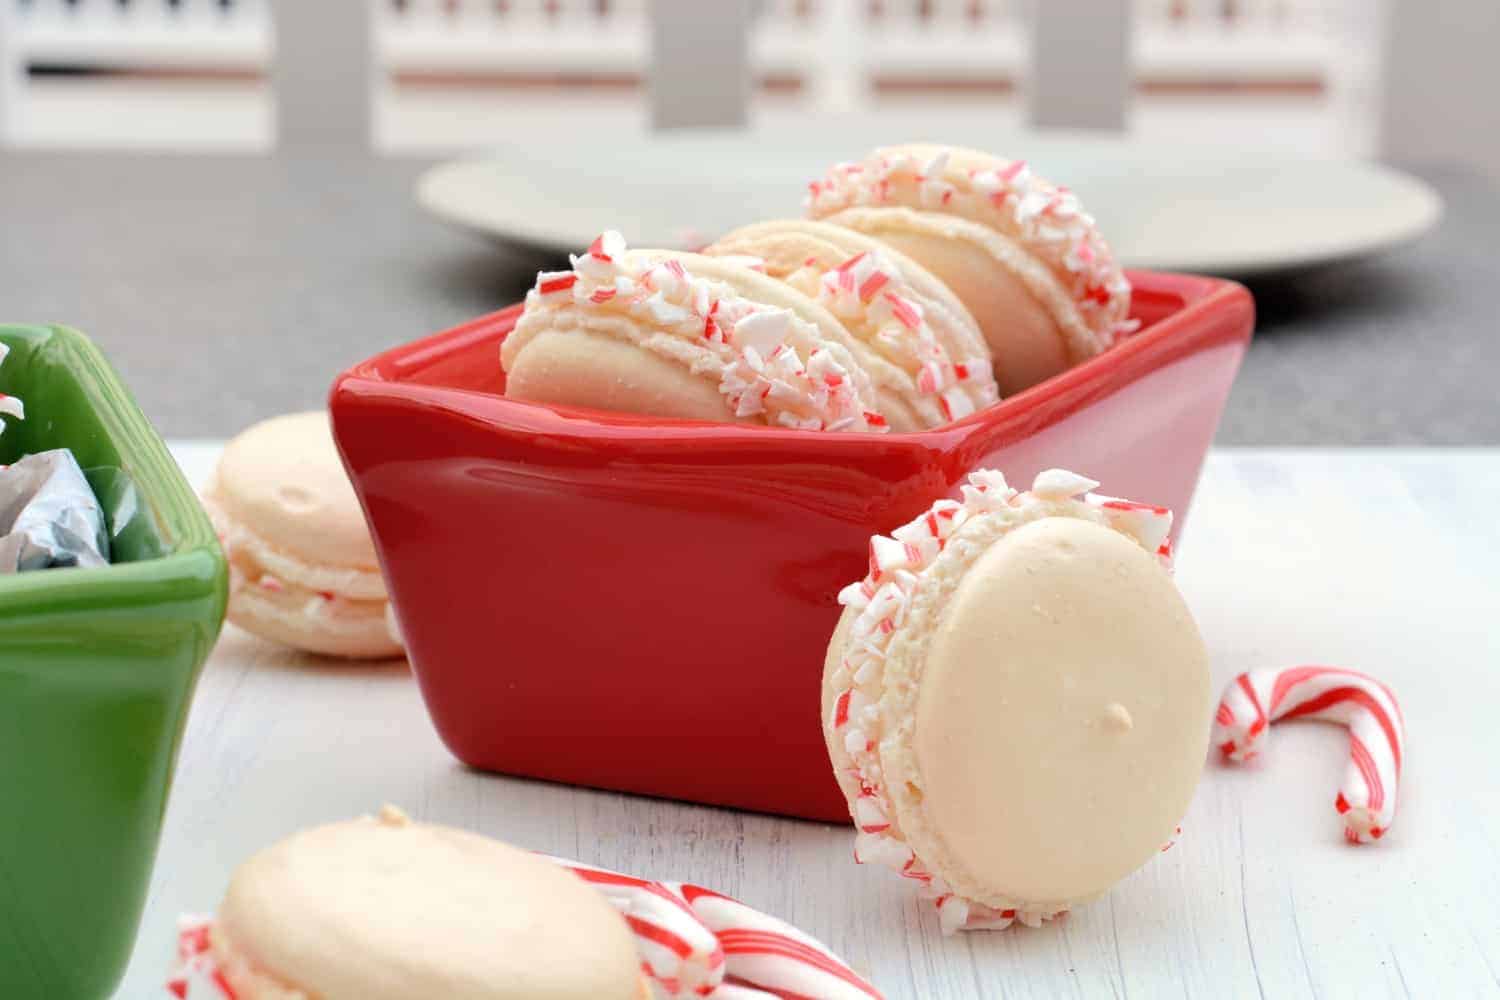 Peppermint Twist Macarons are an easy macaron recipe with a buttercream filling. Perfect recette macarons for Christmas cookies and holiday parties. #easymacaronrecipe #christmascookies www.savoryexperiments.com 